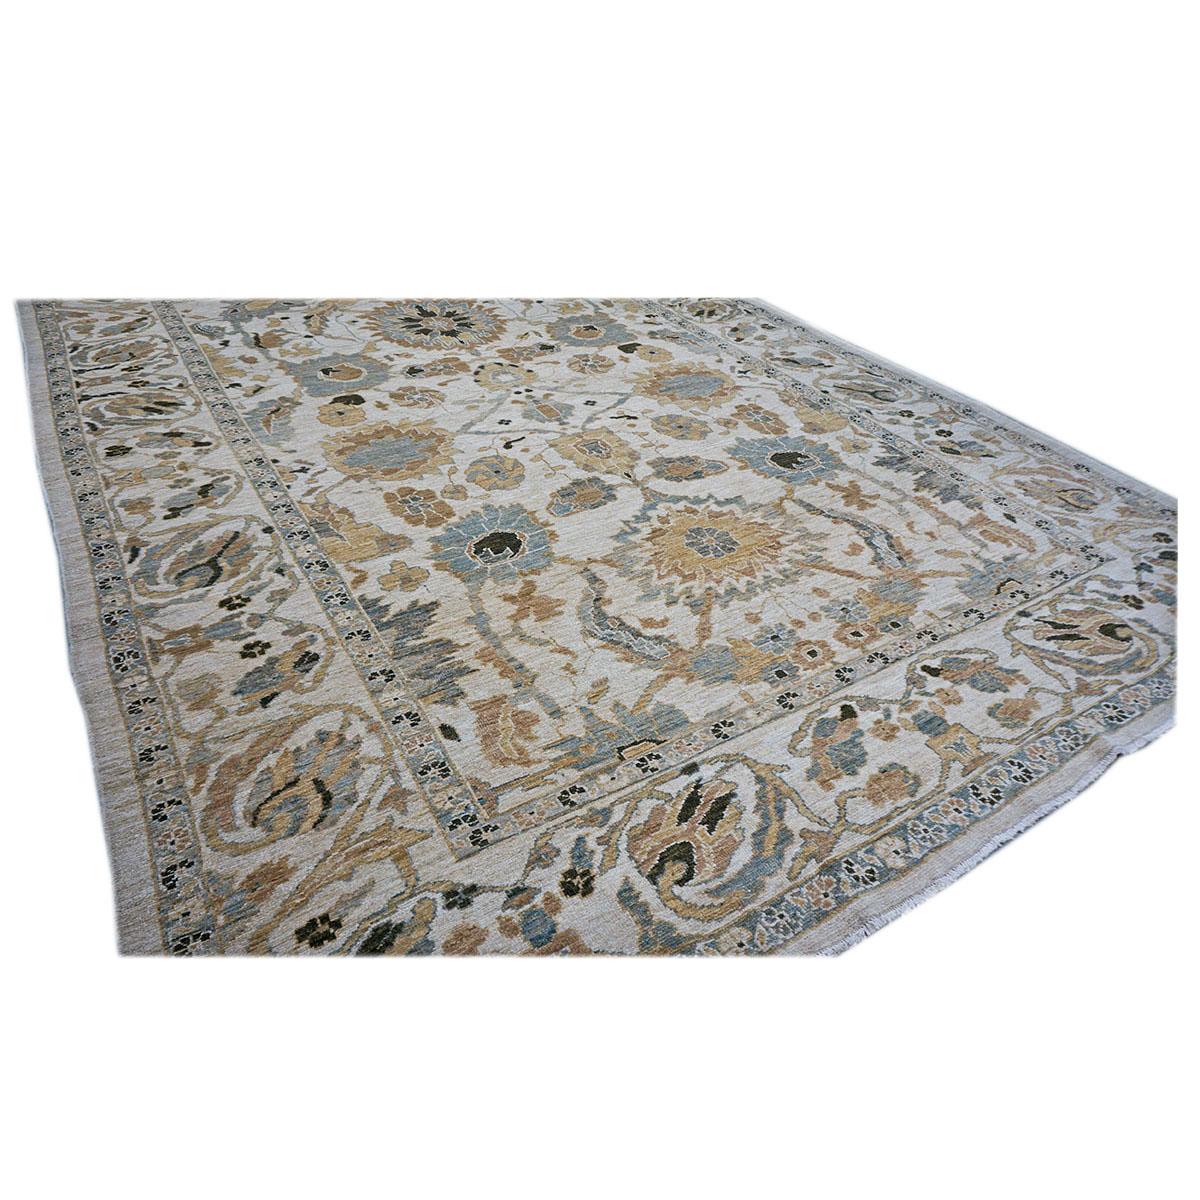 21st Century Persian Sultanabad 9x12 Ivory and Slate Blue Wool Rug In Good Condition For Sale In Houston, TX